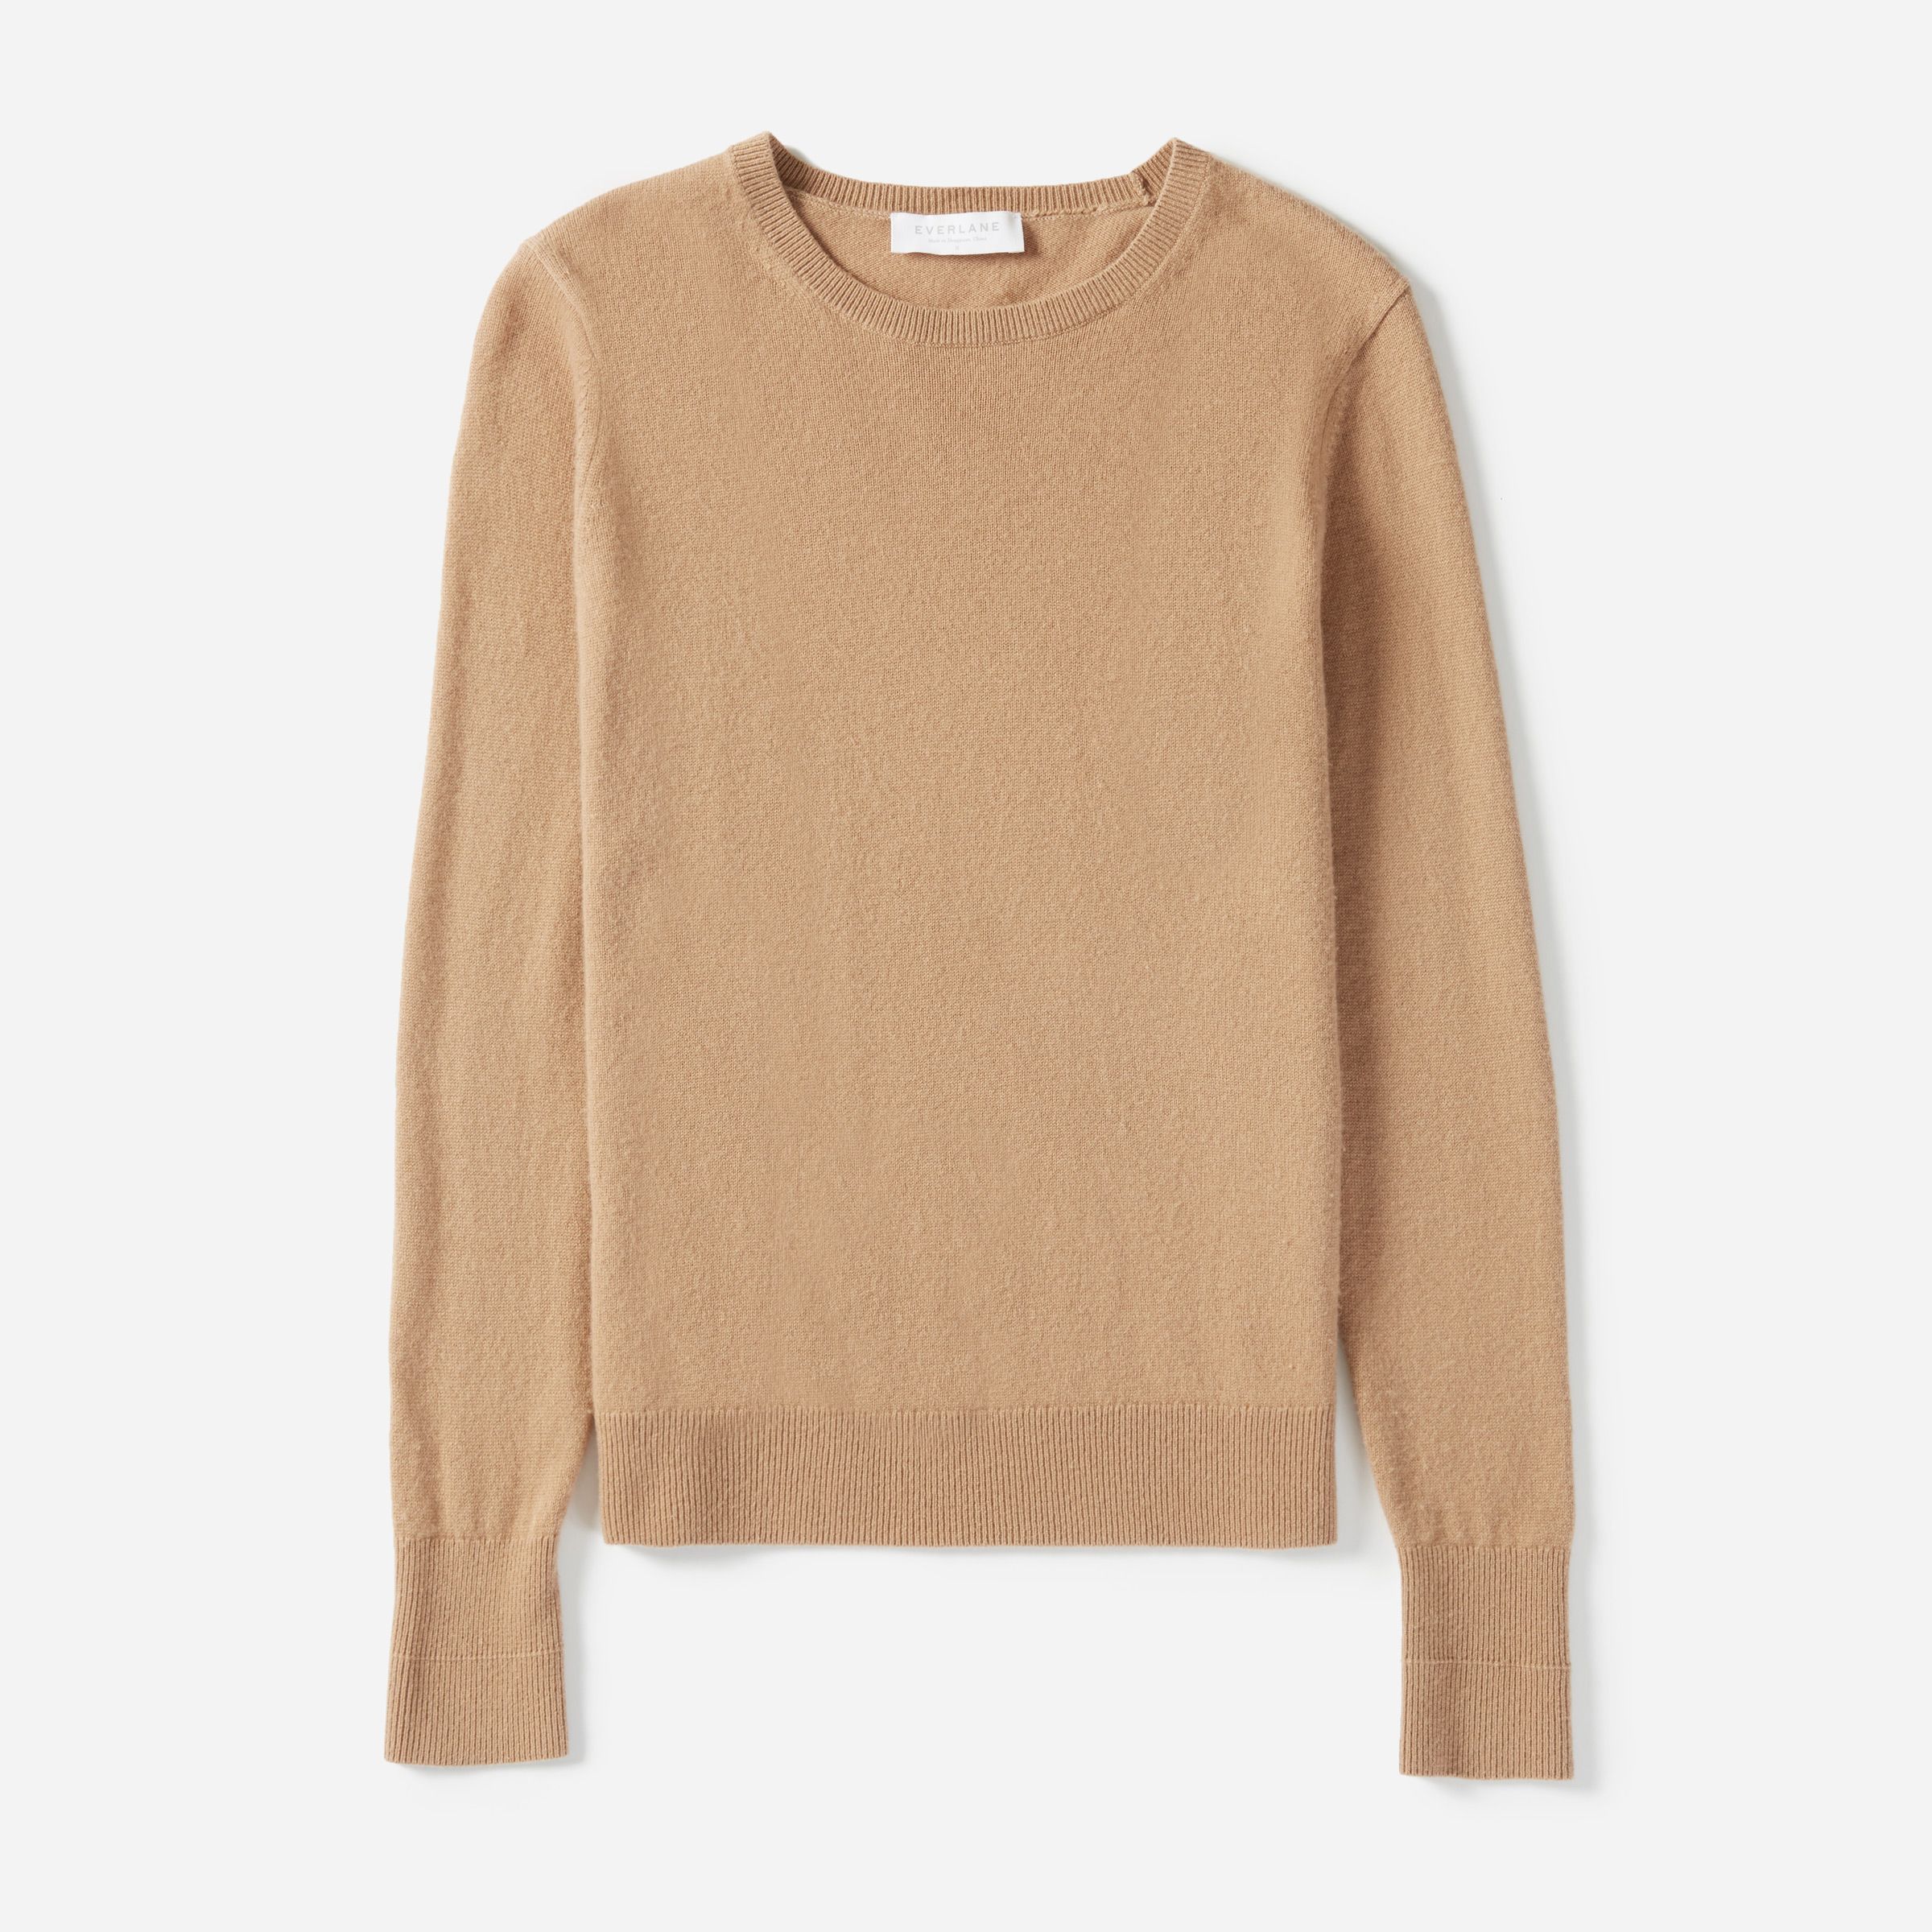 HomeWomenSweaters The Cashmere CrewThe Cashmere CrewFeels greatAn instant essential!great cashmere s | Everlane